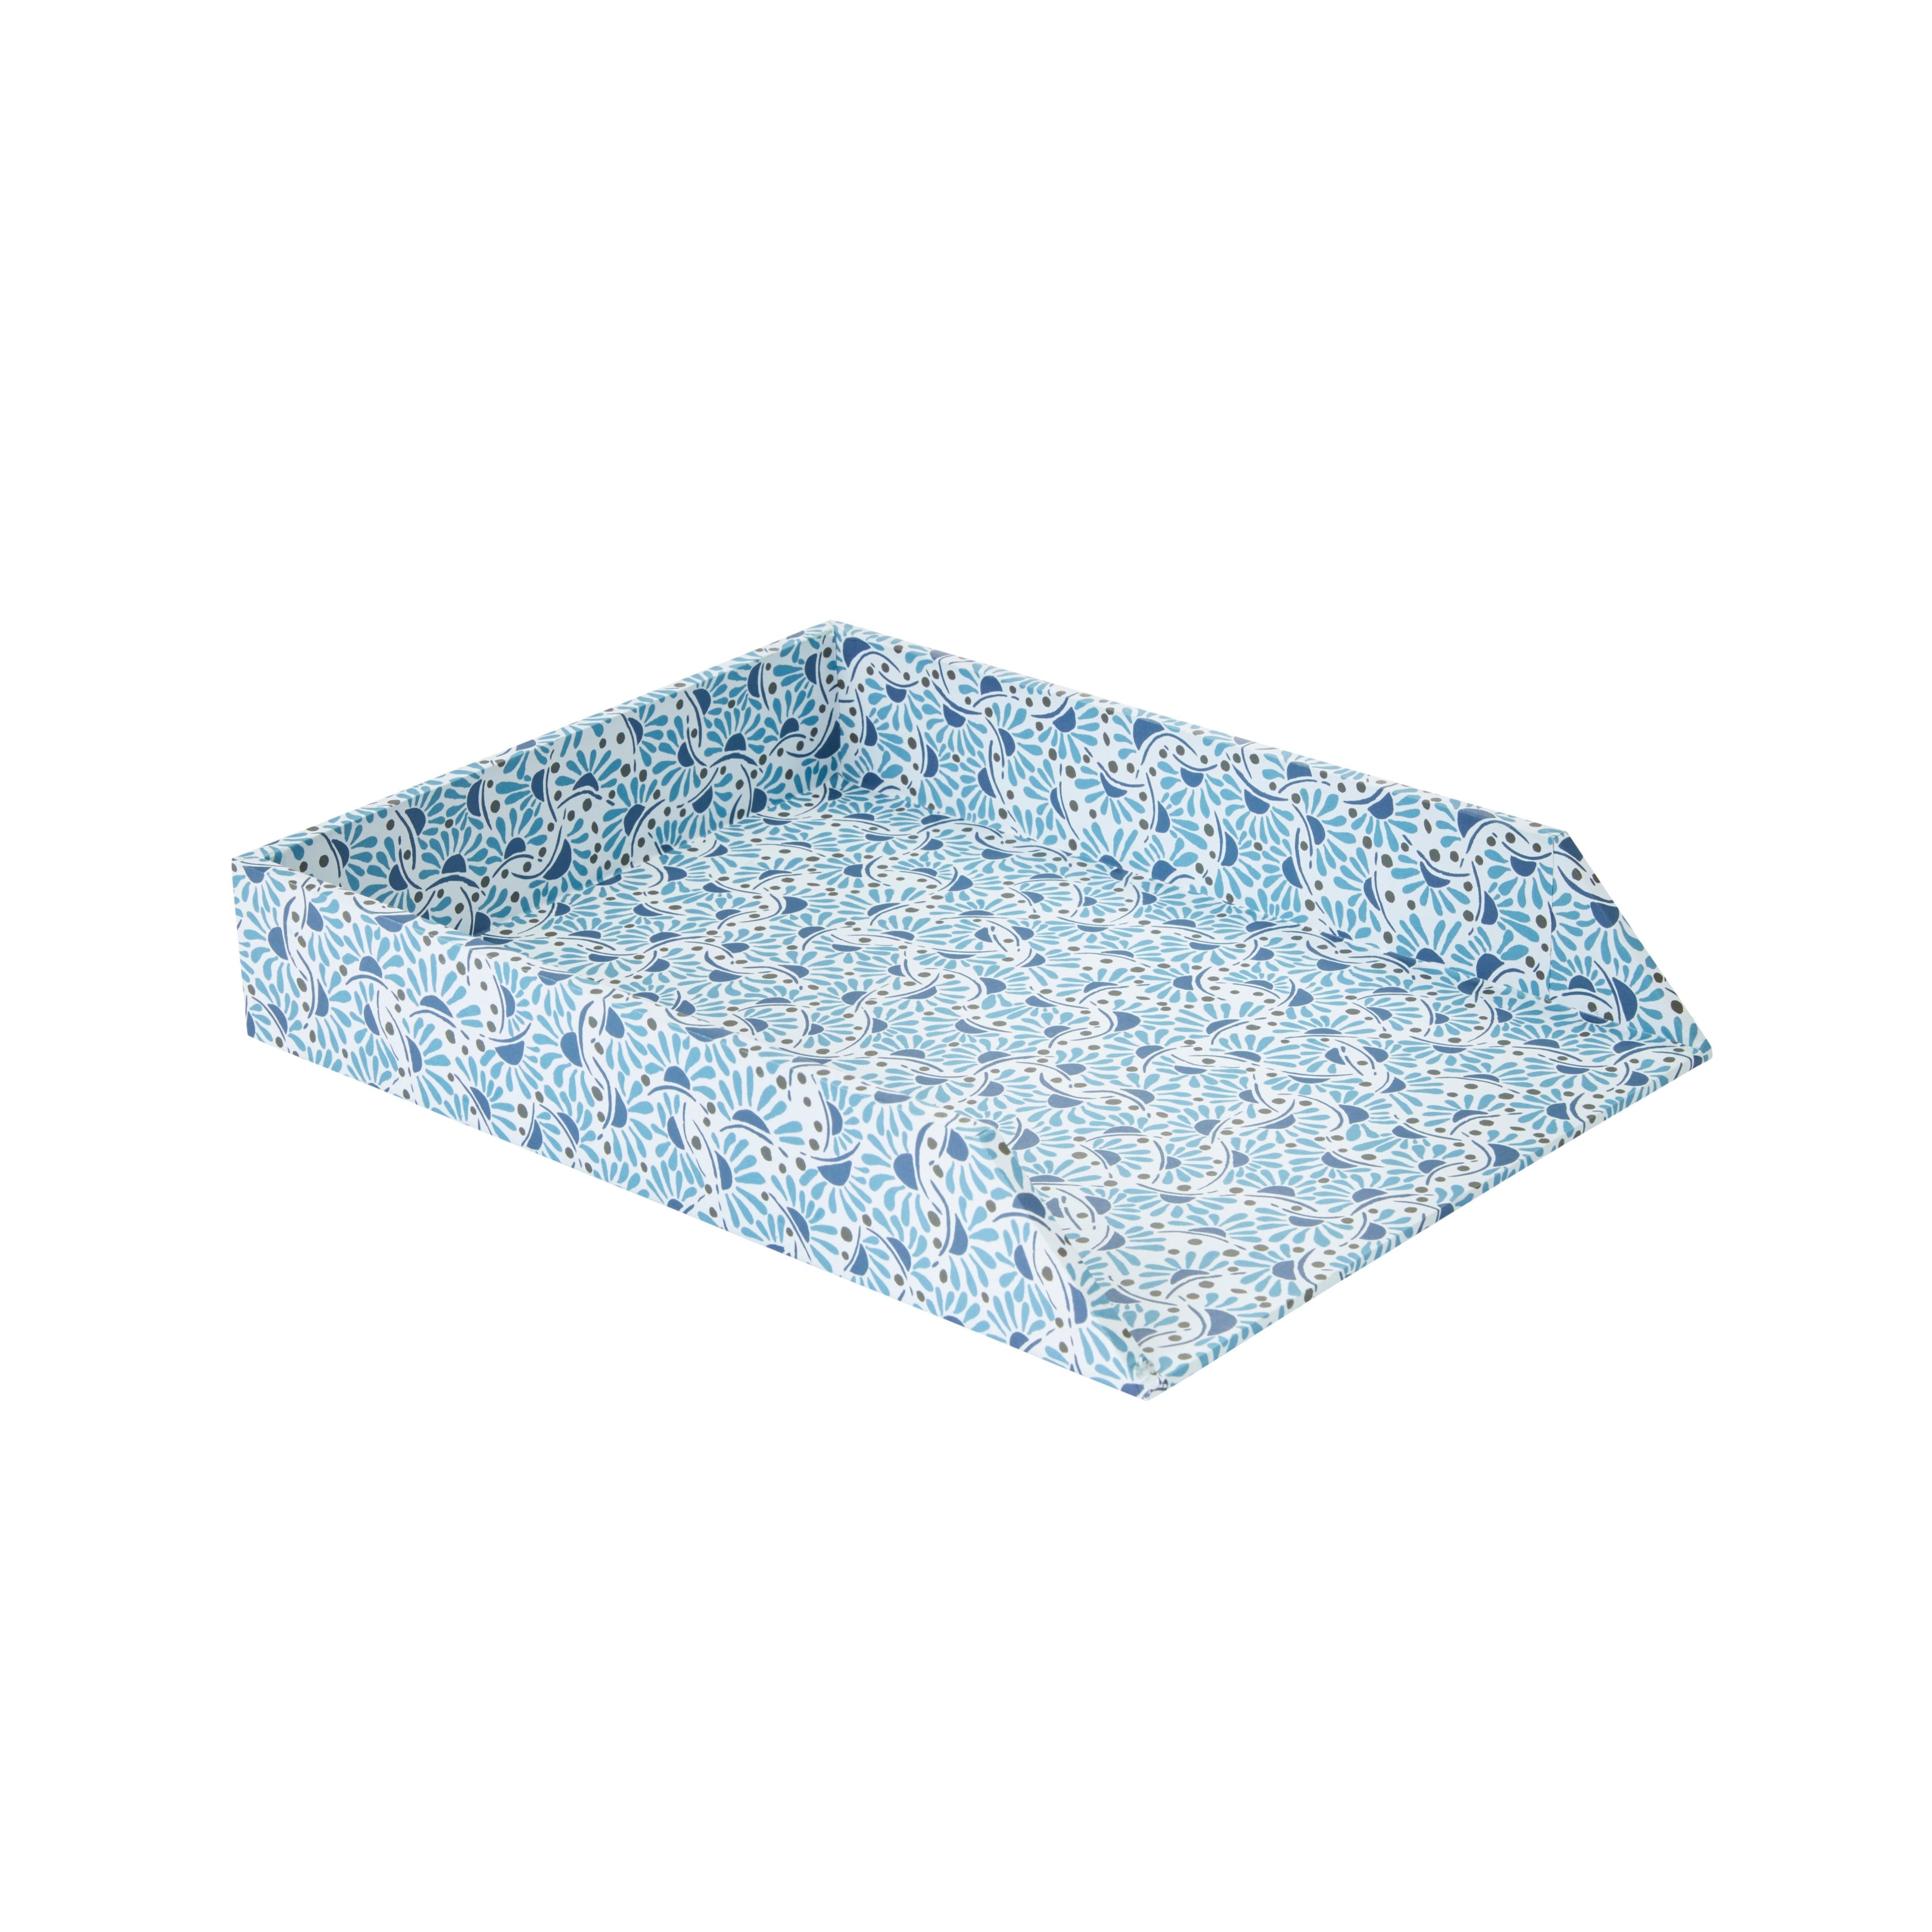 Nina Campbell letter tray in blue colour way stationery collection on white background